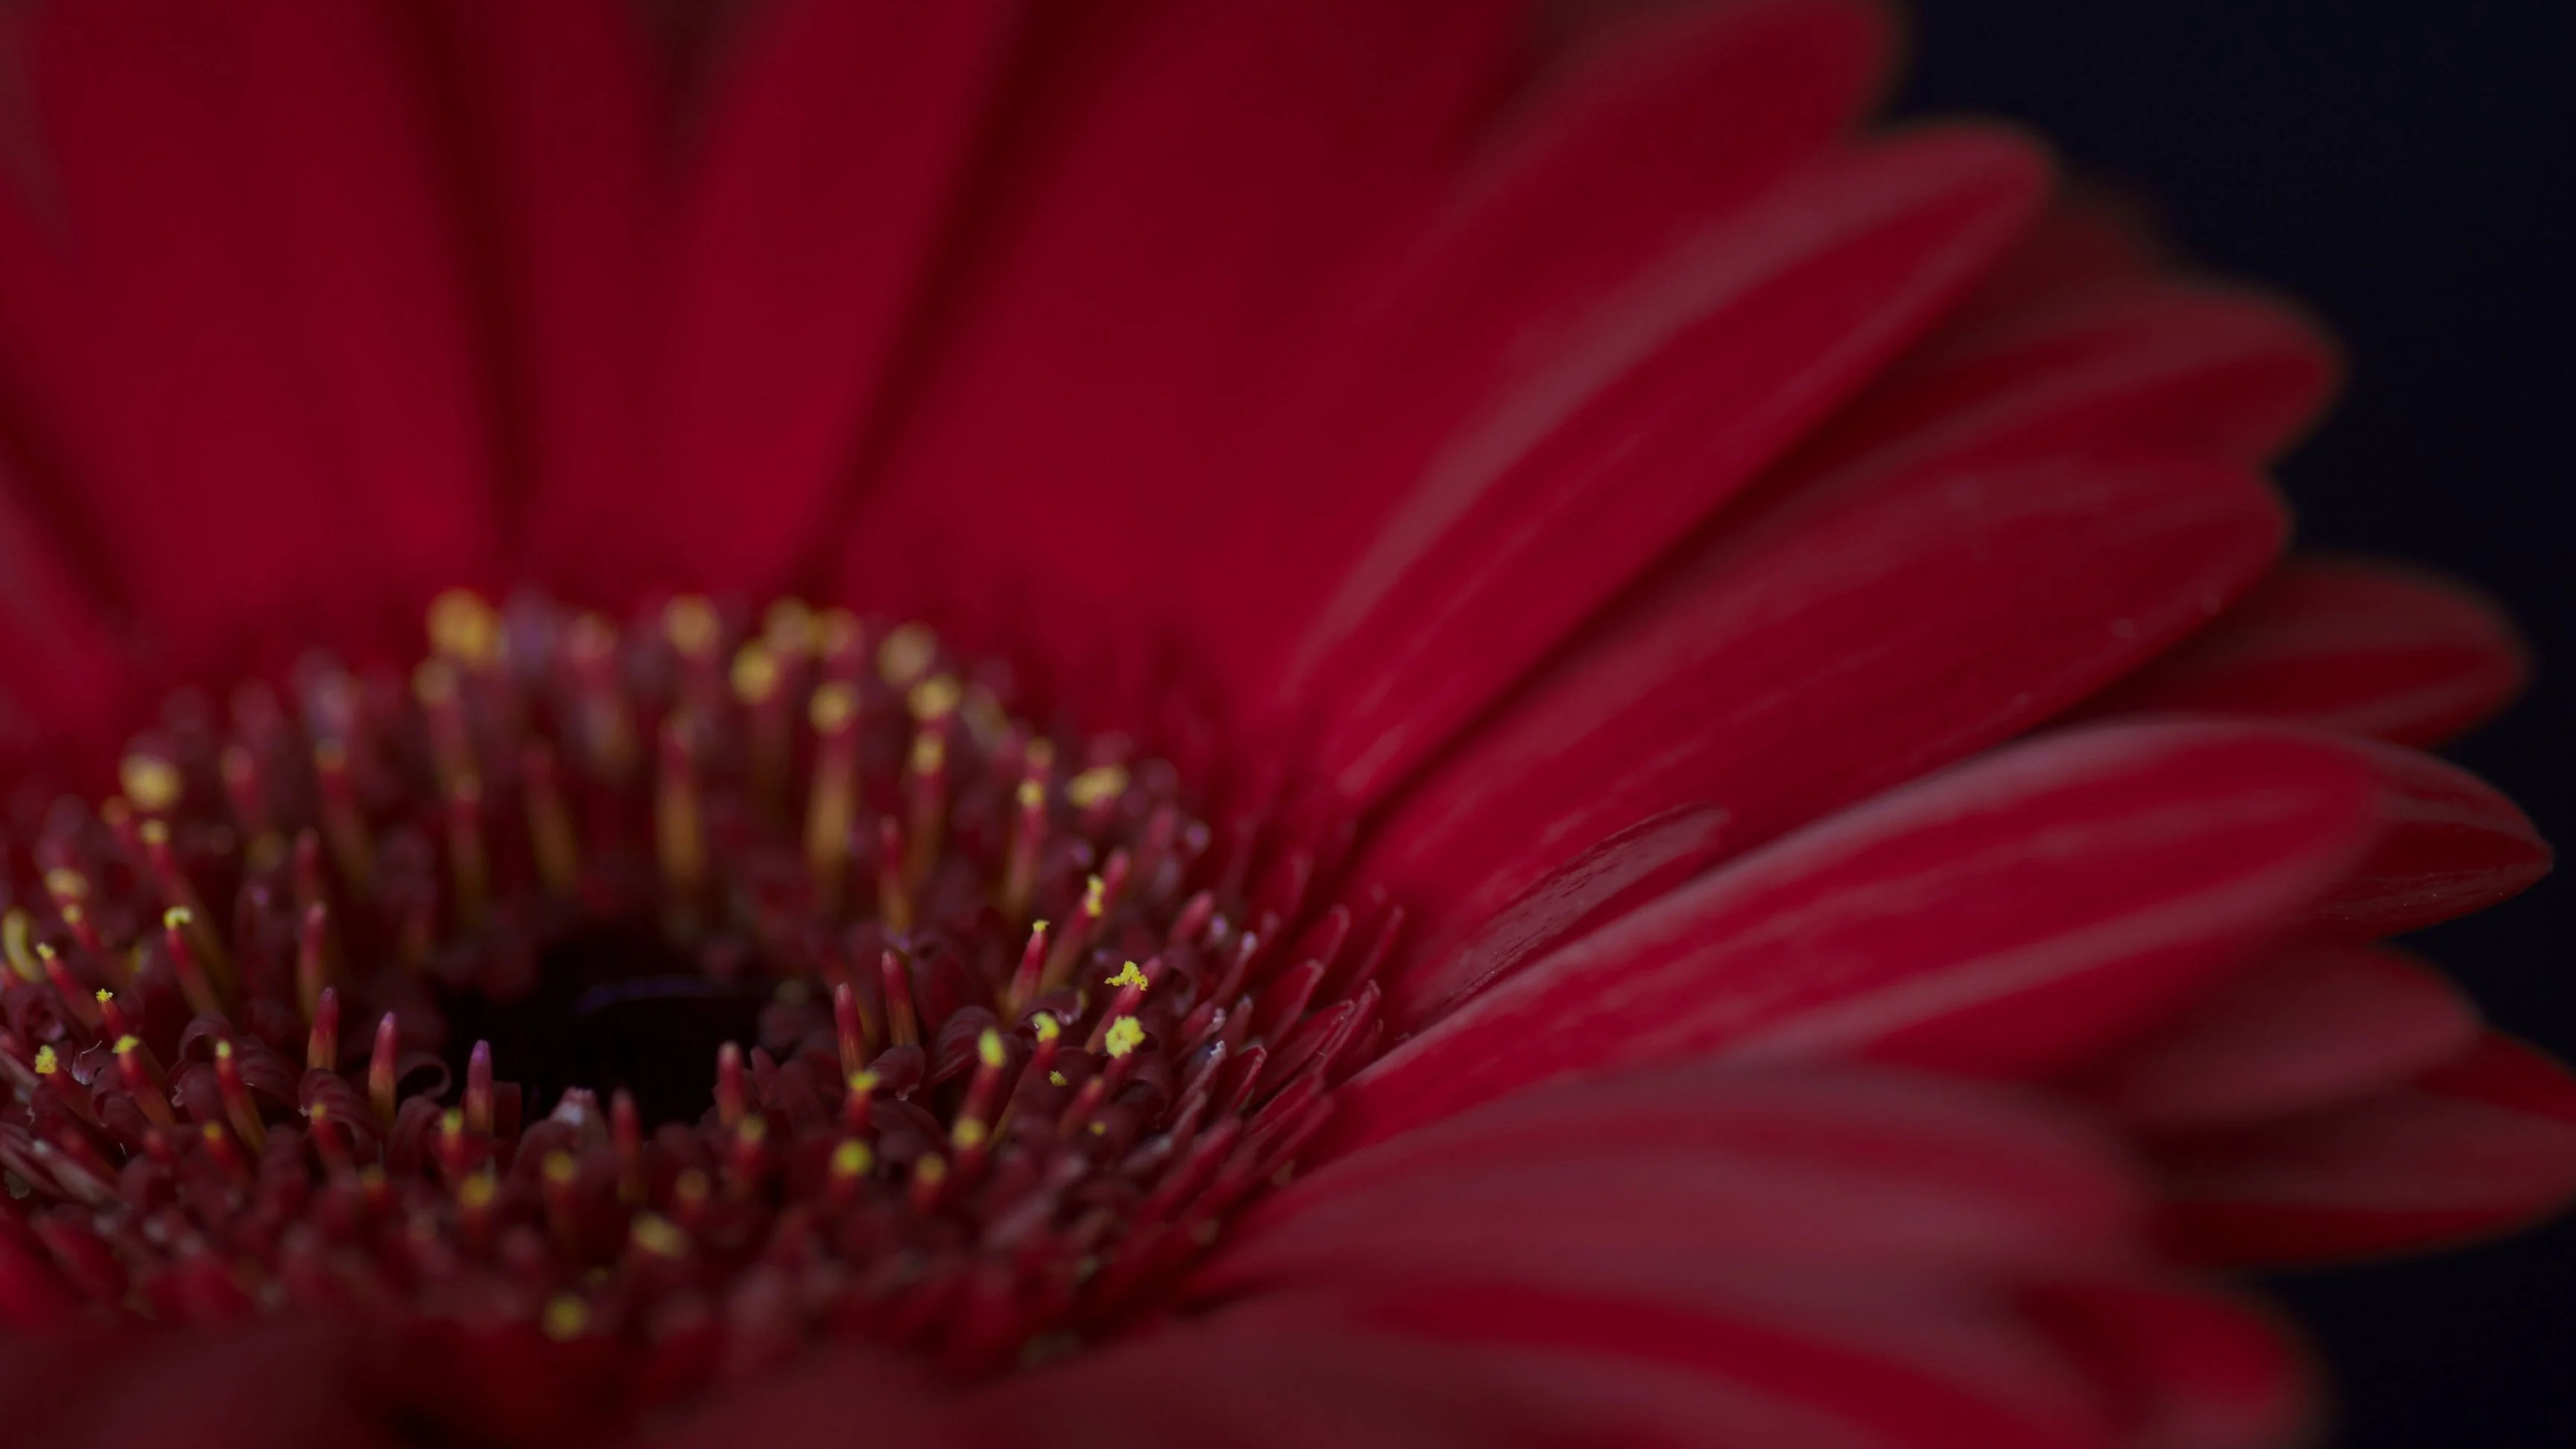 Gerbera Daisy: Very popular and widely used as a decorative garden plant or as cut flowers. 3840x2160 4K Wallpaper.